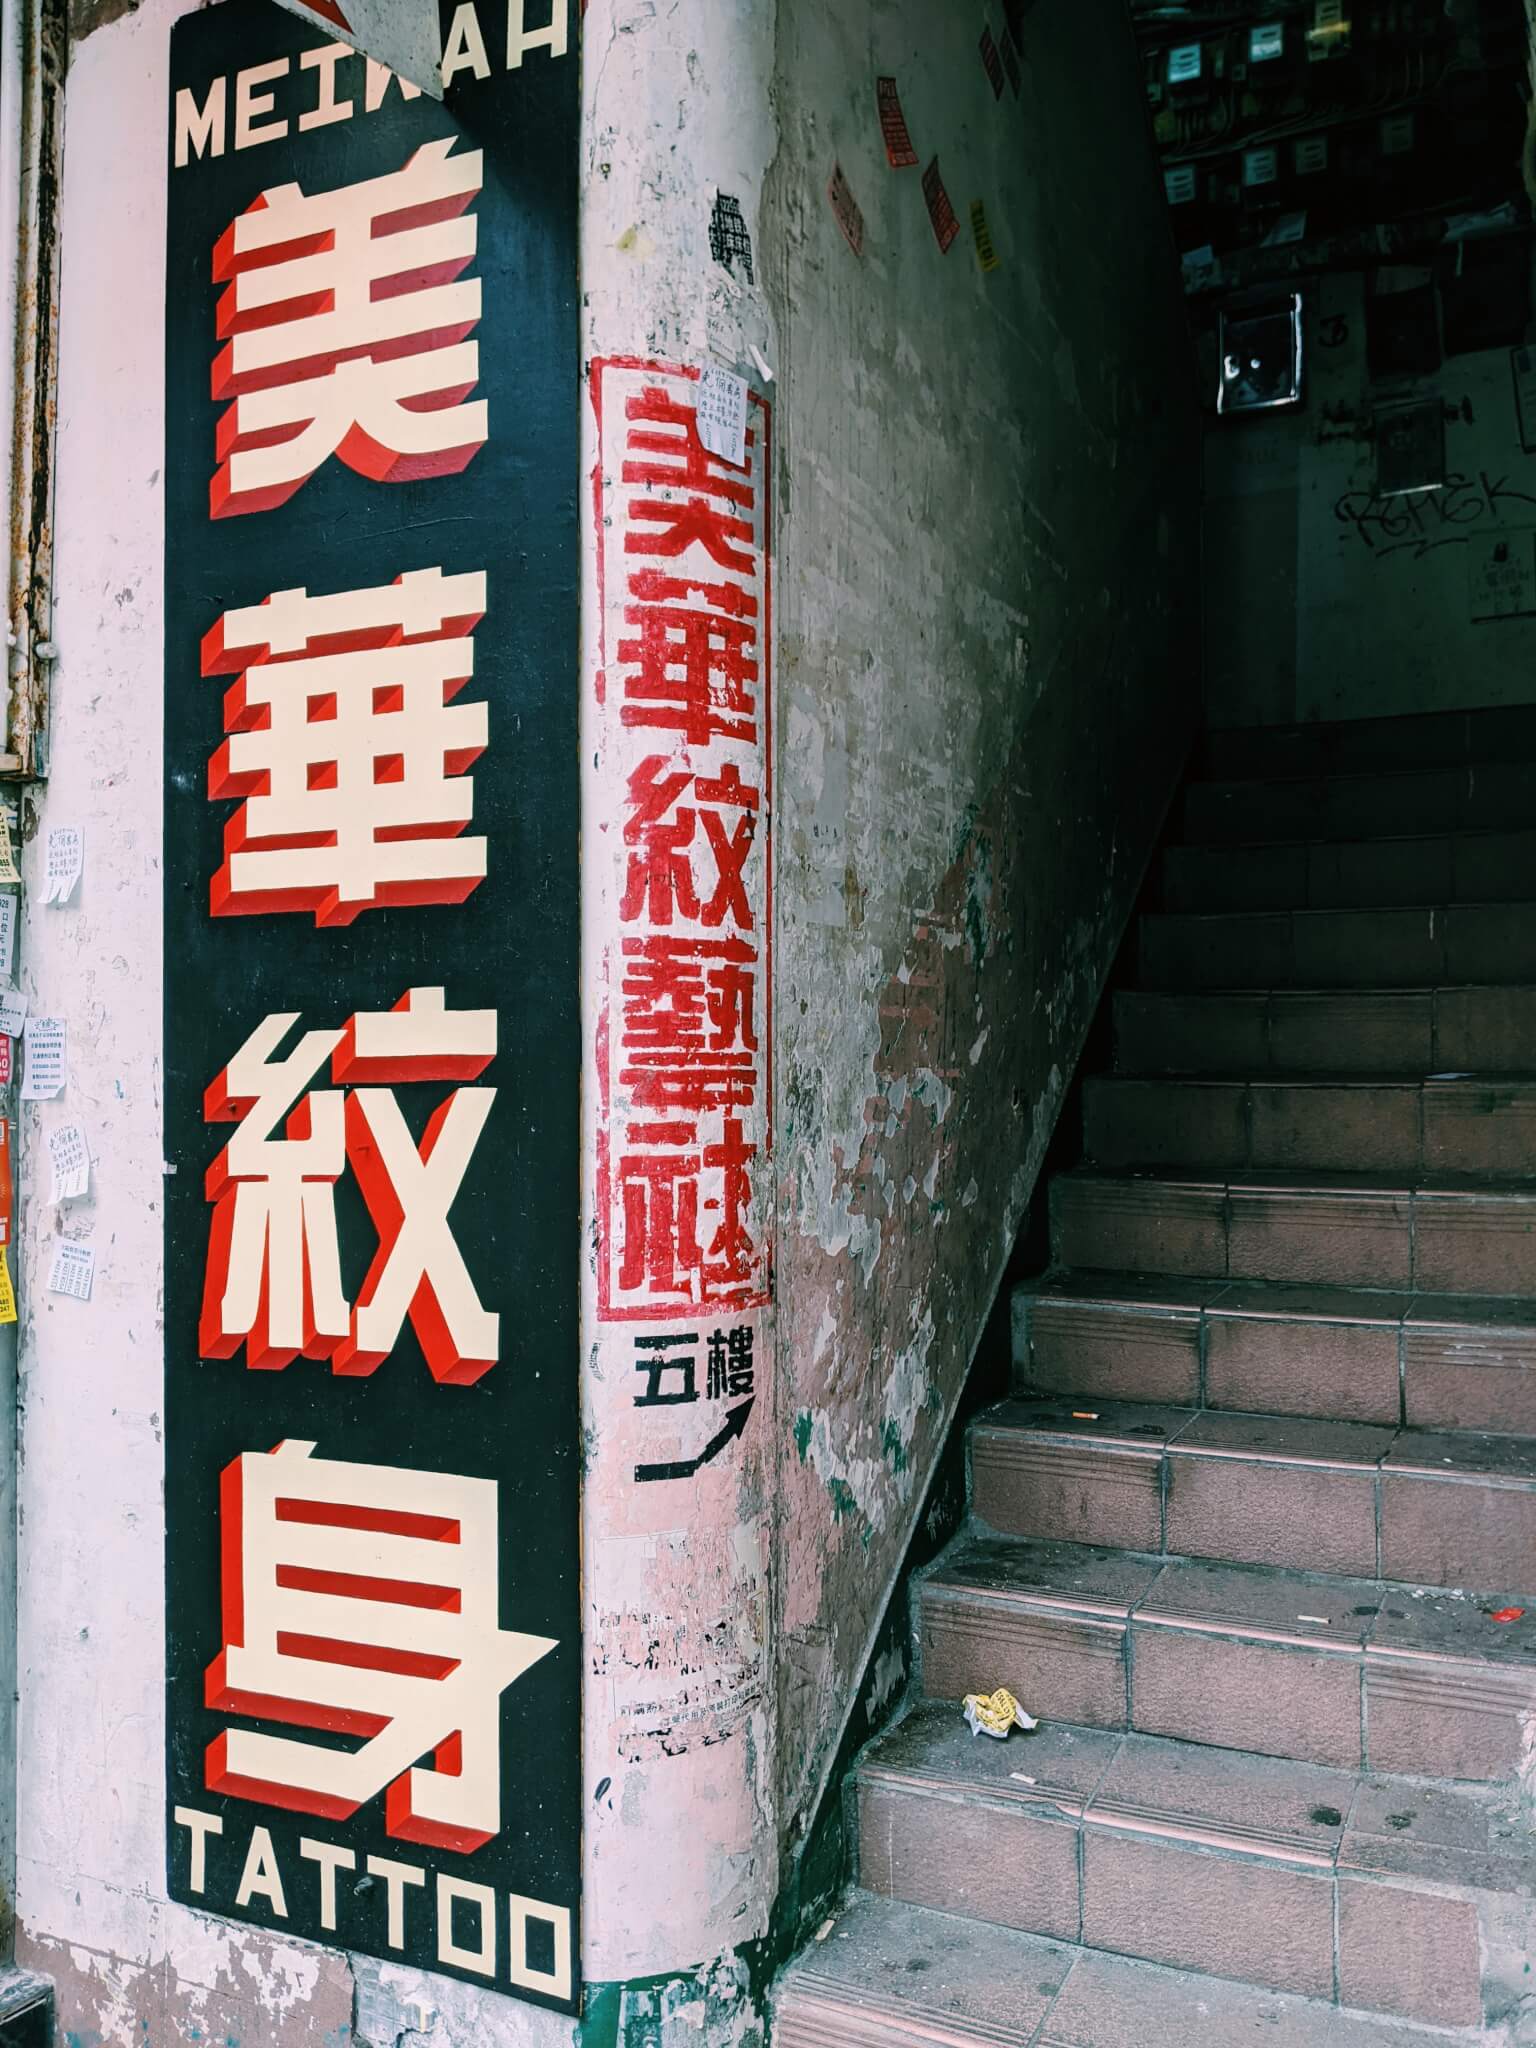 Processed with VSCO with c1 preset